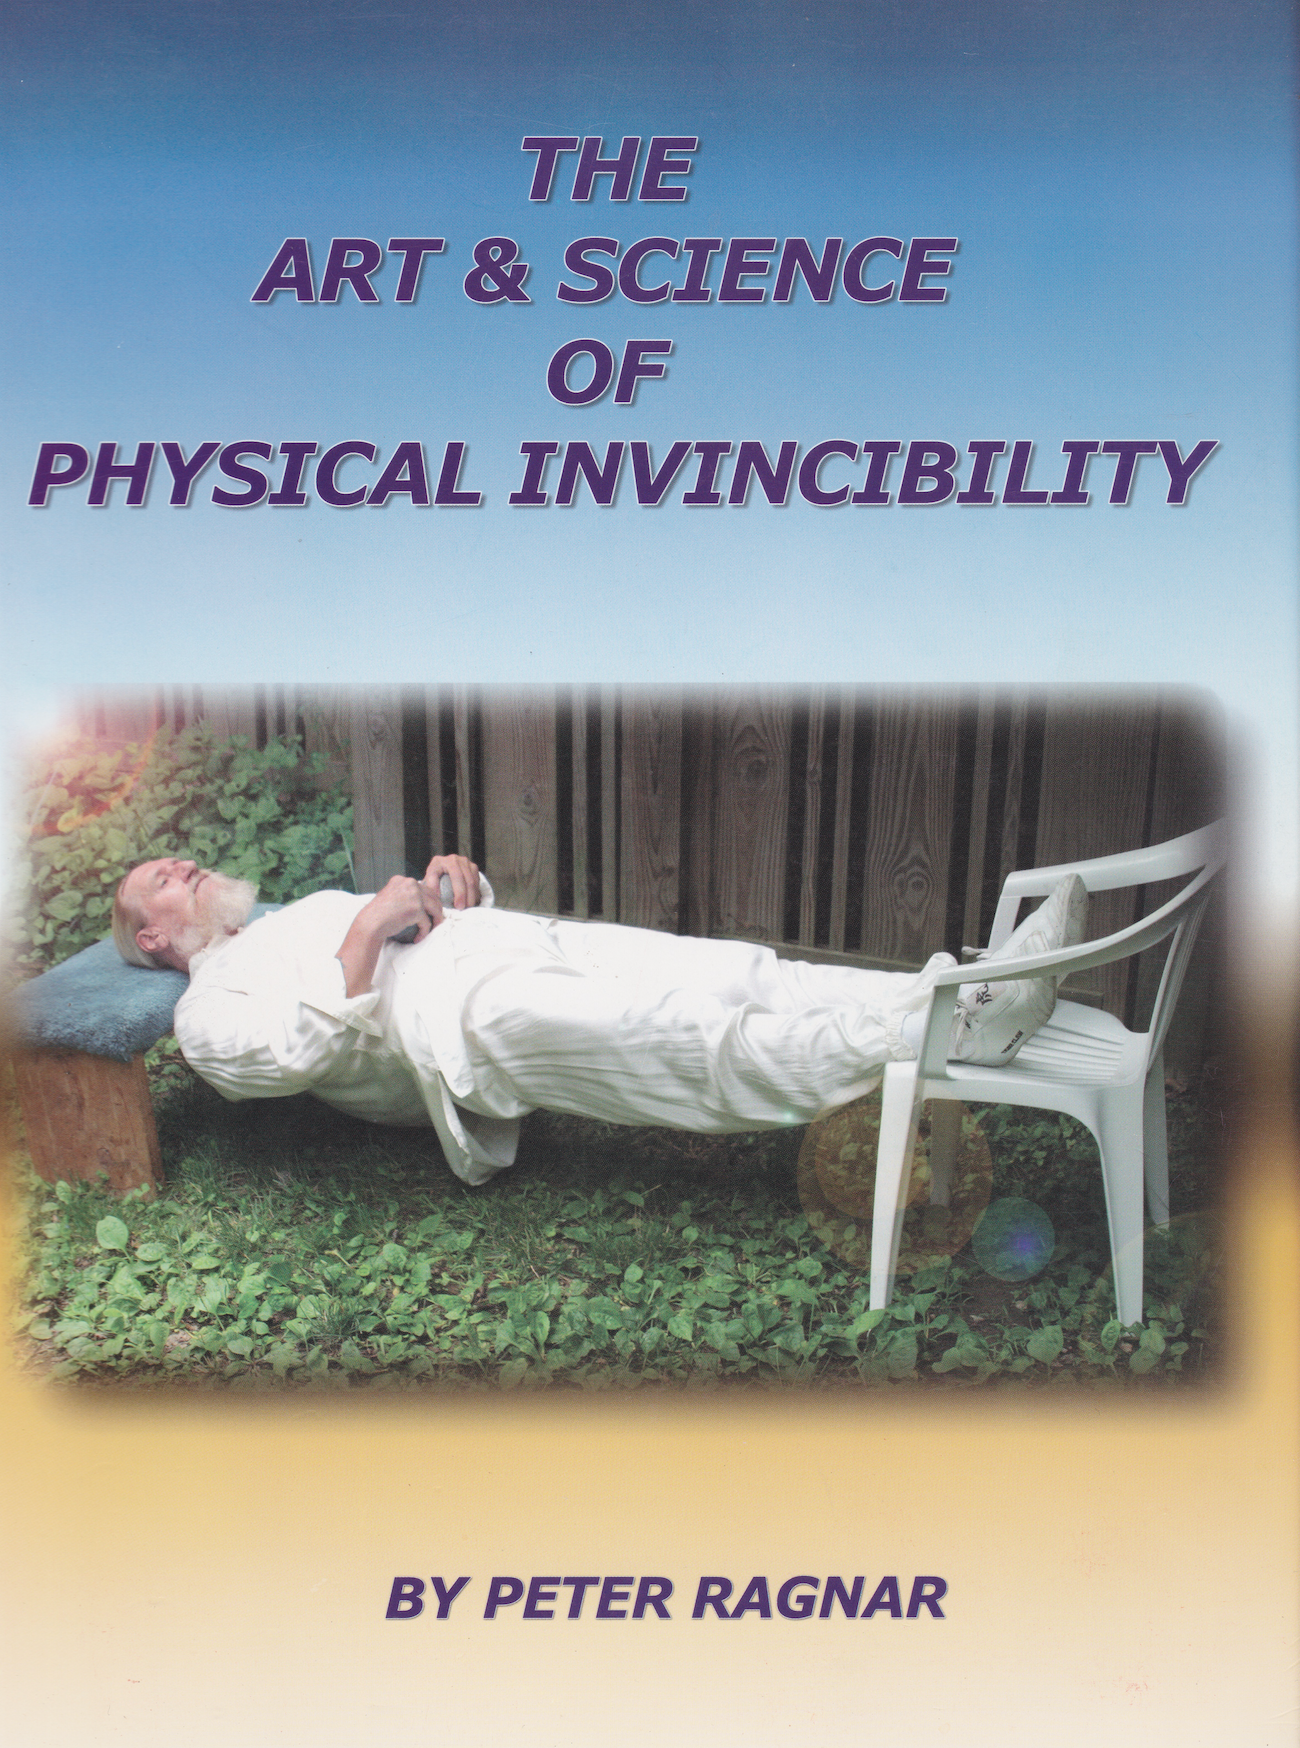 The Art & Science of Physical Invincibility Book by Peter Ragnar (Preowned)